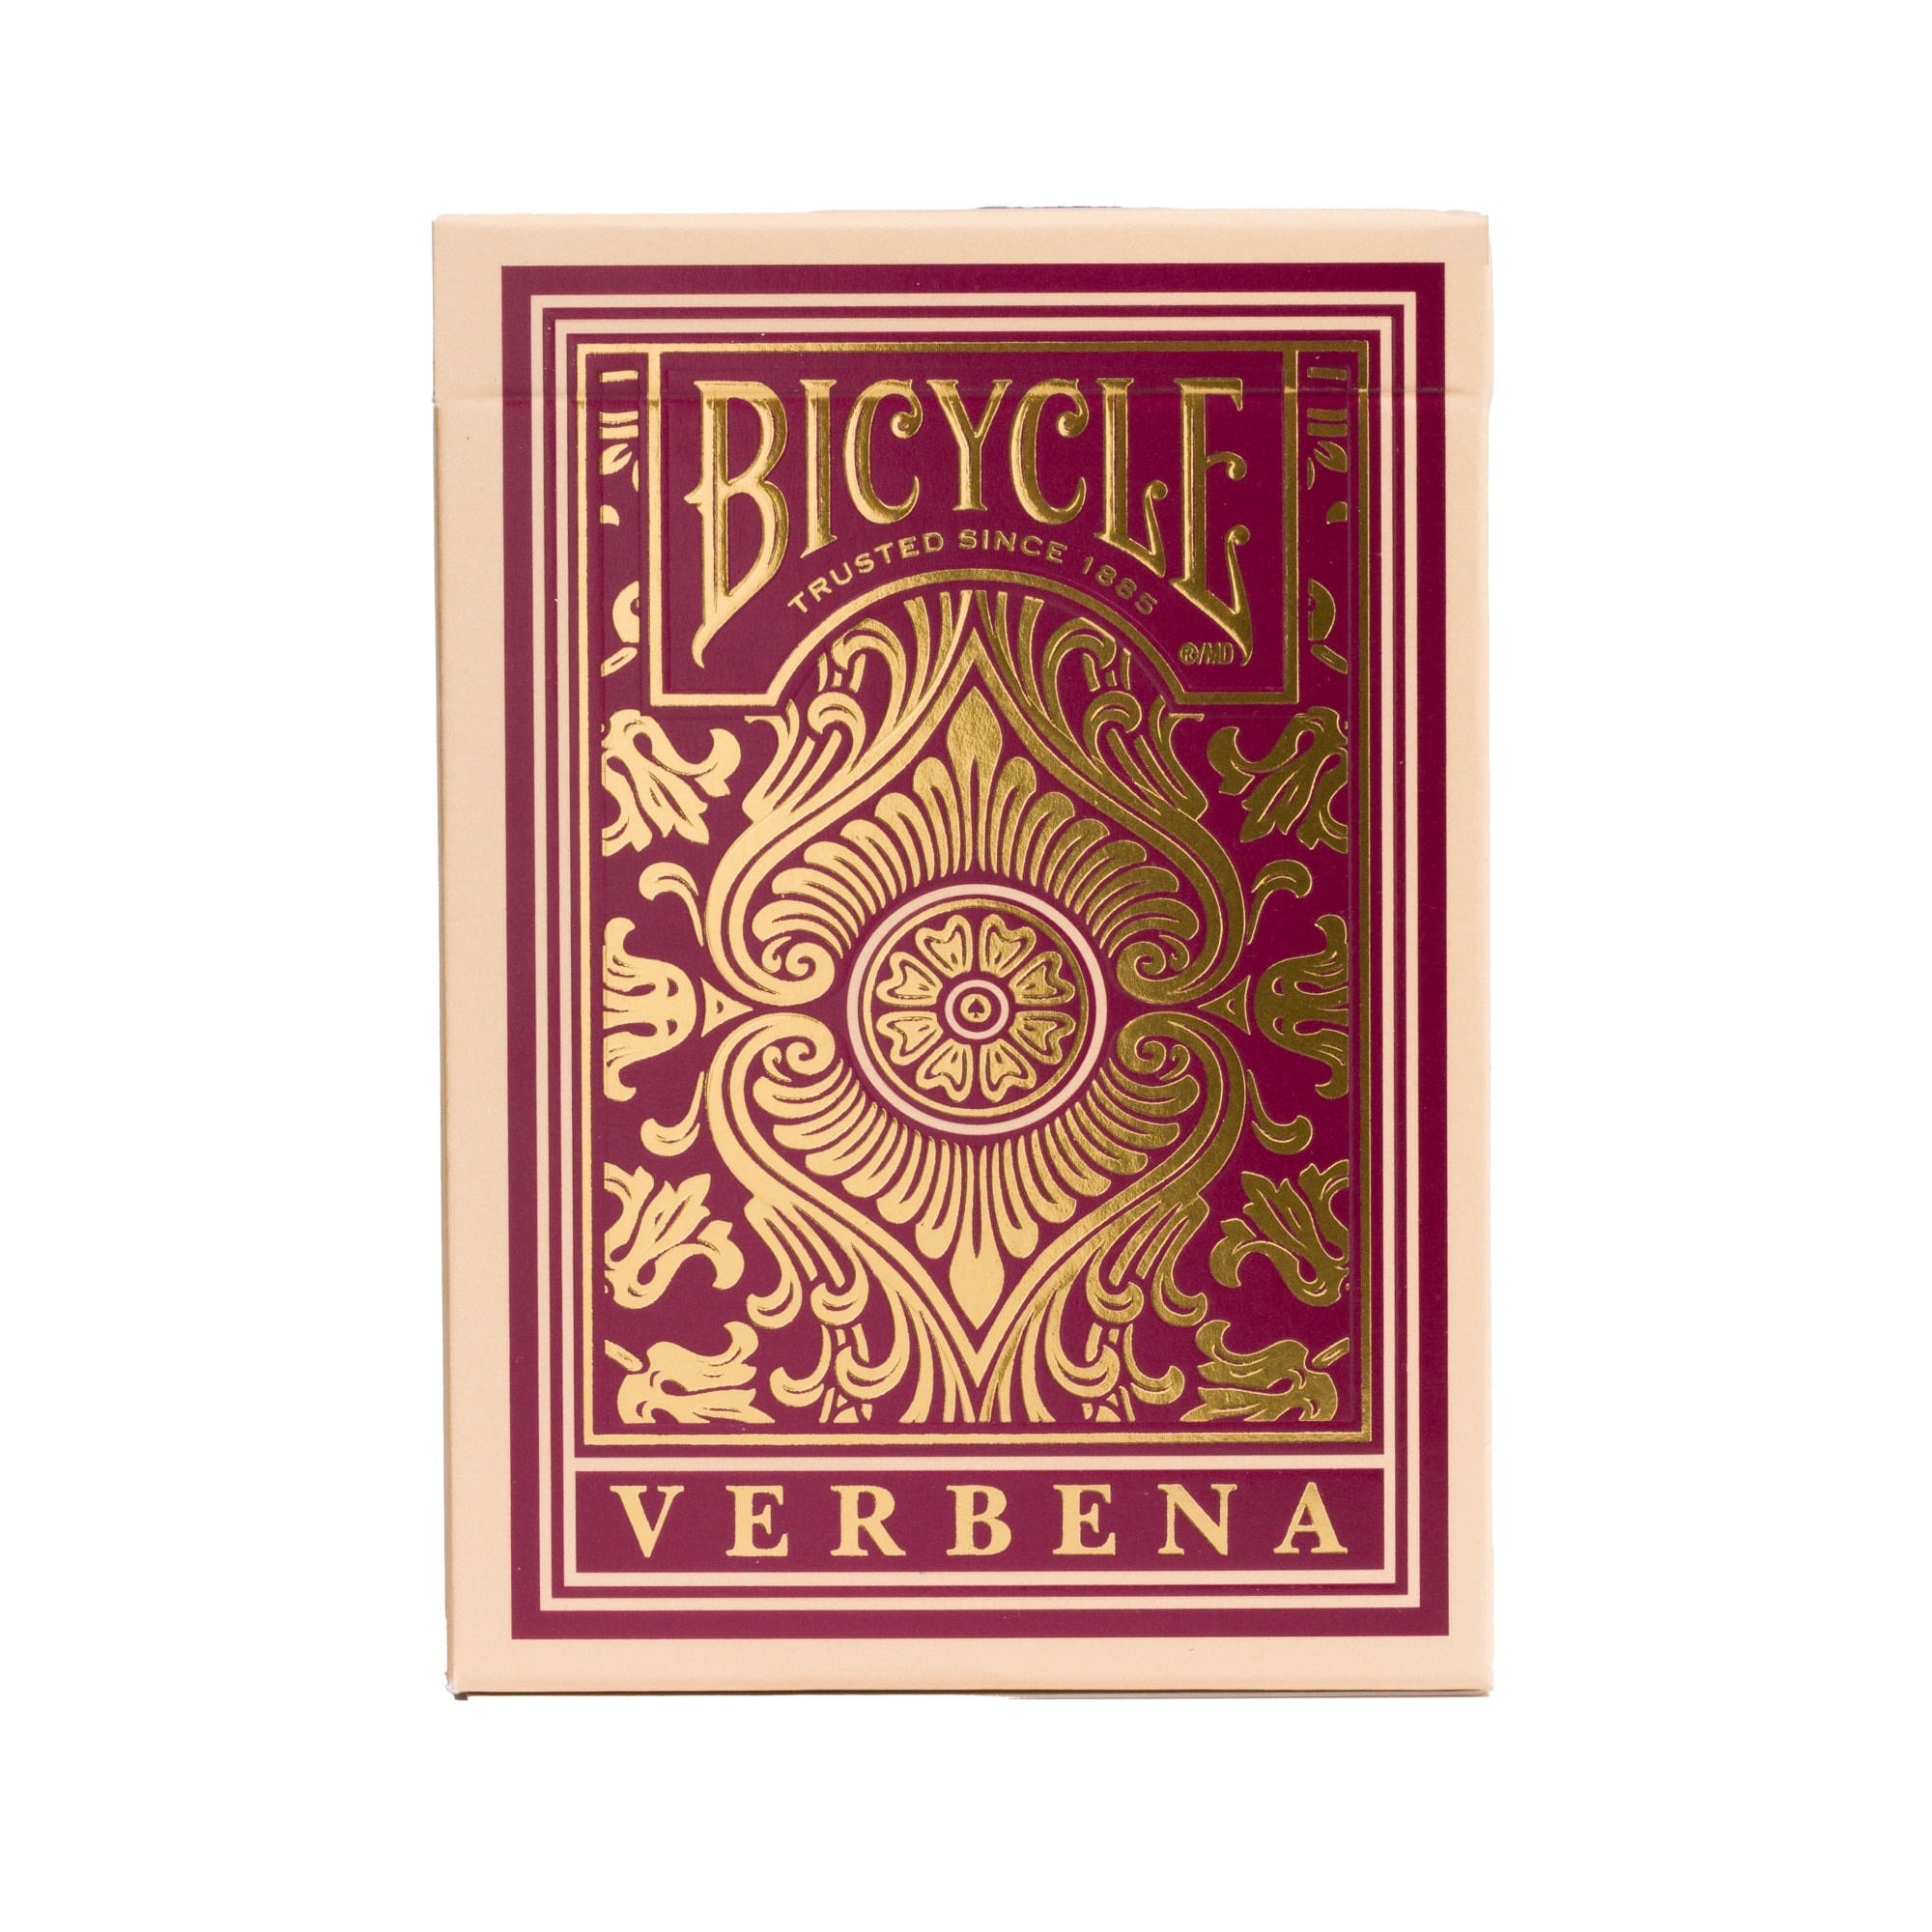 Bicycle Verbena Playing Cards-United States Playing Cards Company-Ace Cards & Collectibles